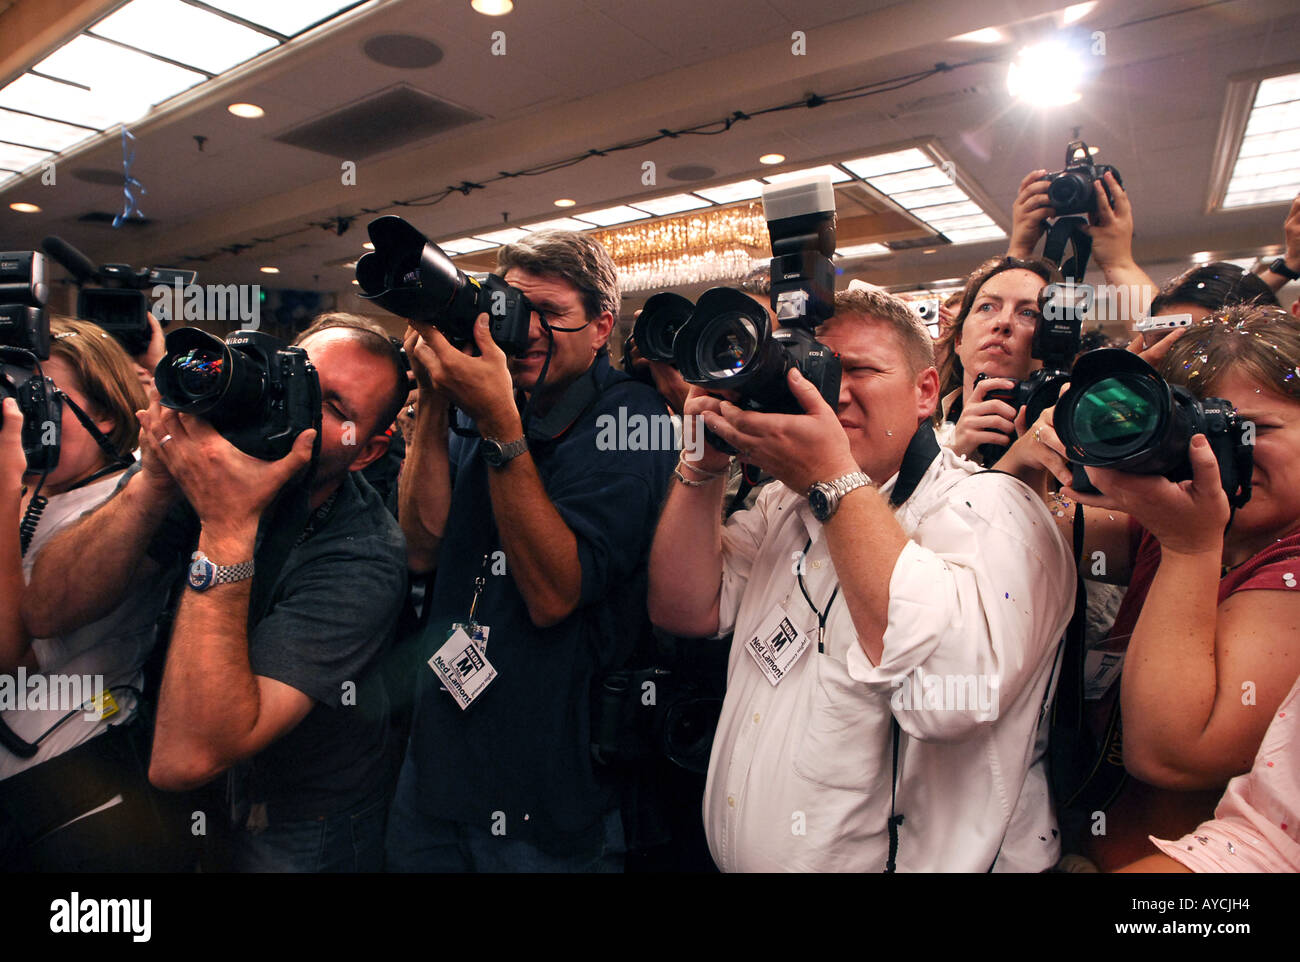 A group of News Photographers shoot during a political election night Stock Photo